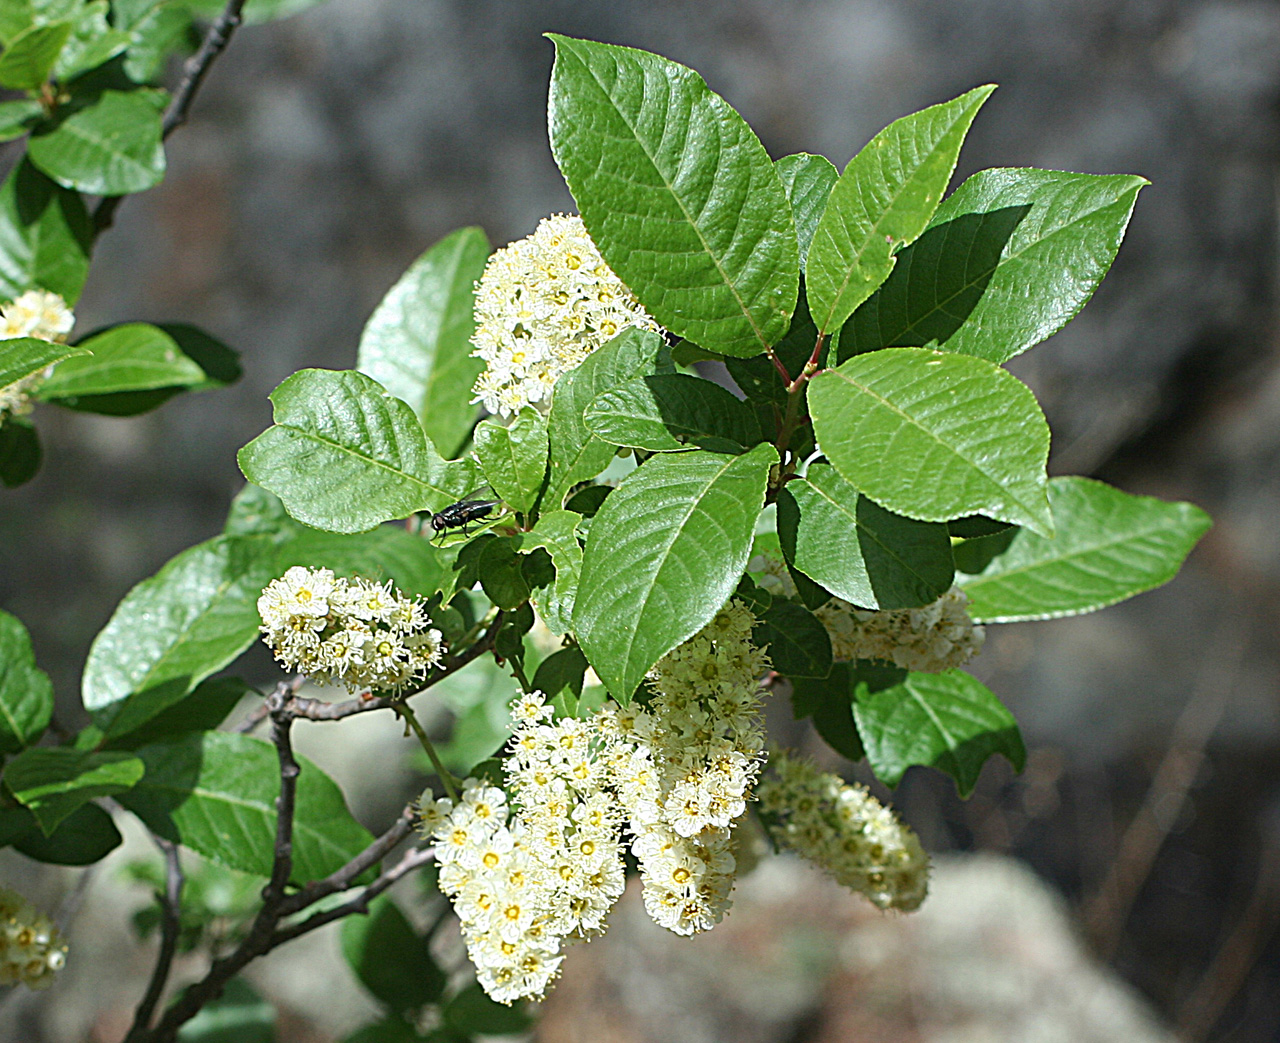 Twig with glossy, simple leaves and white flower clusters